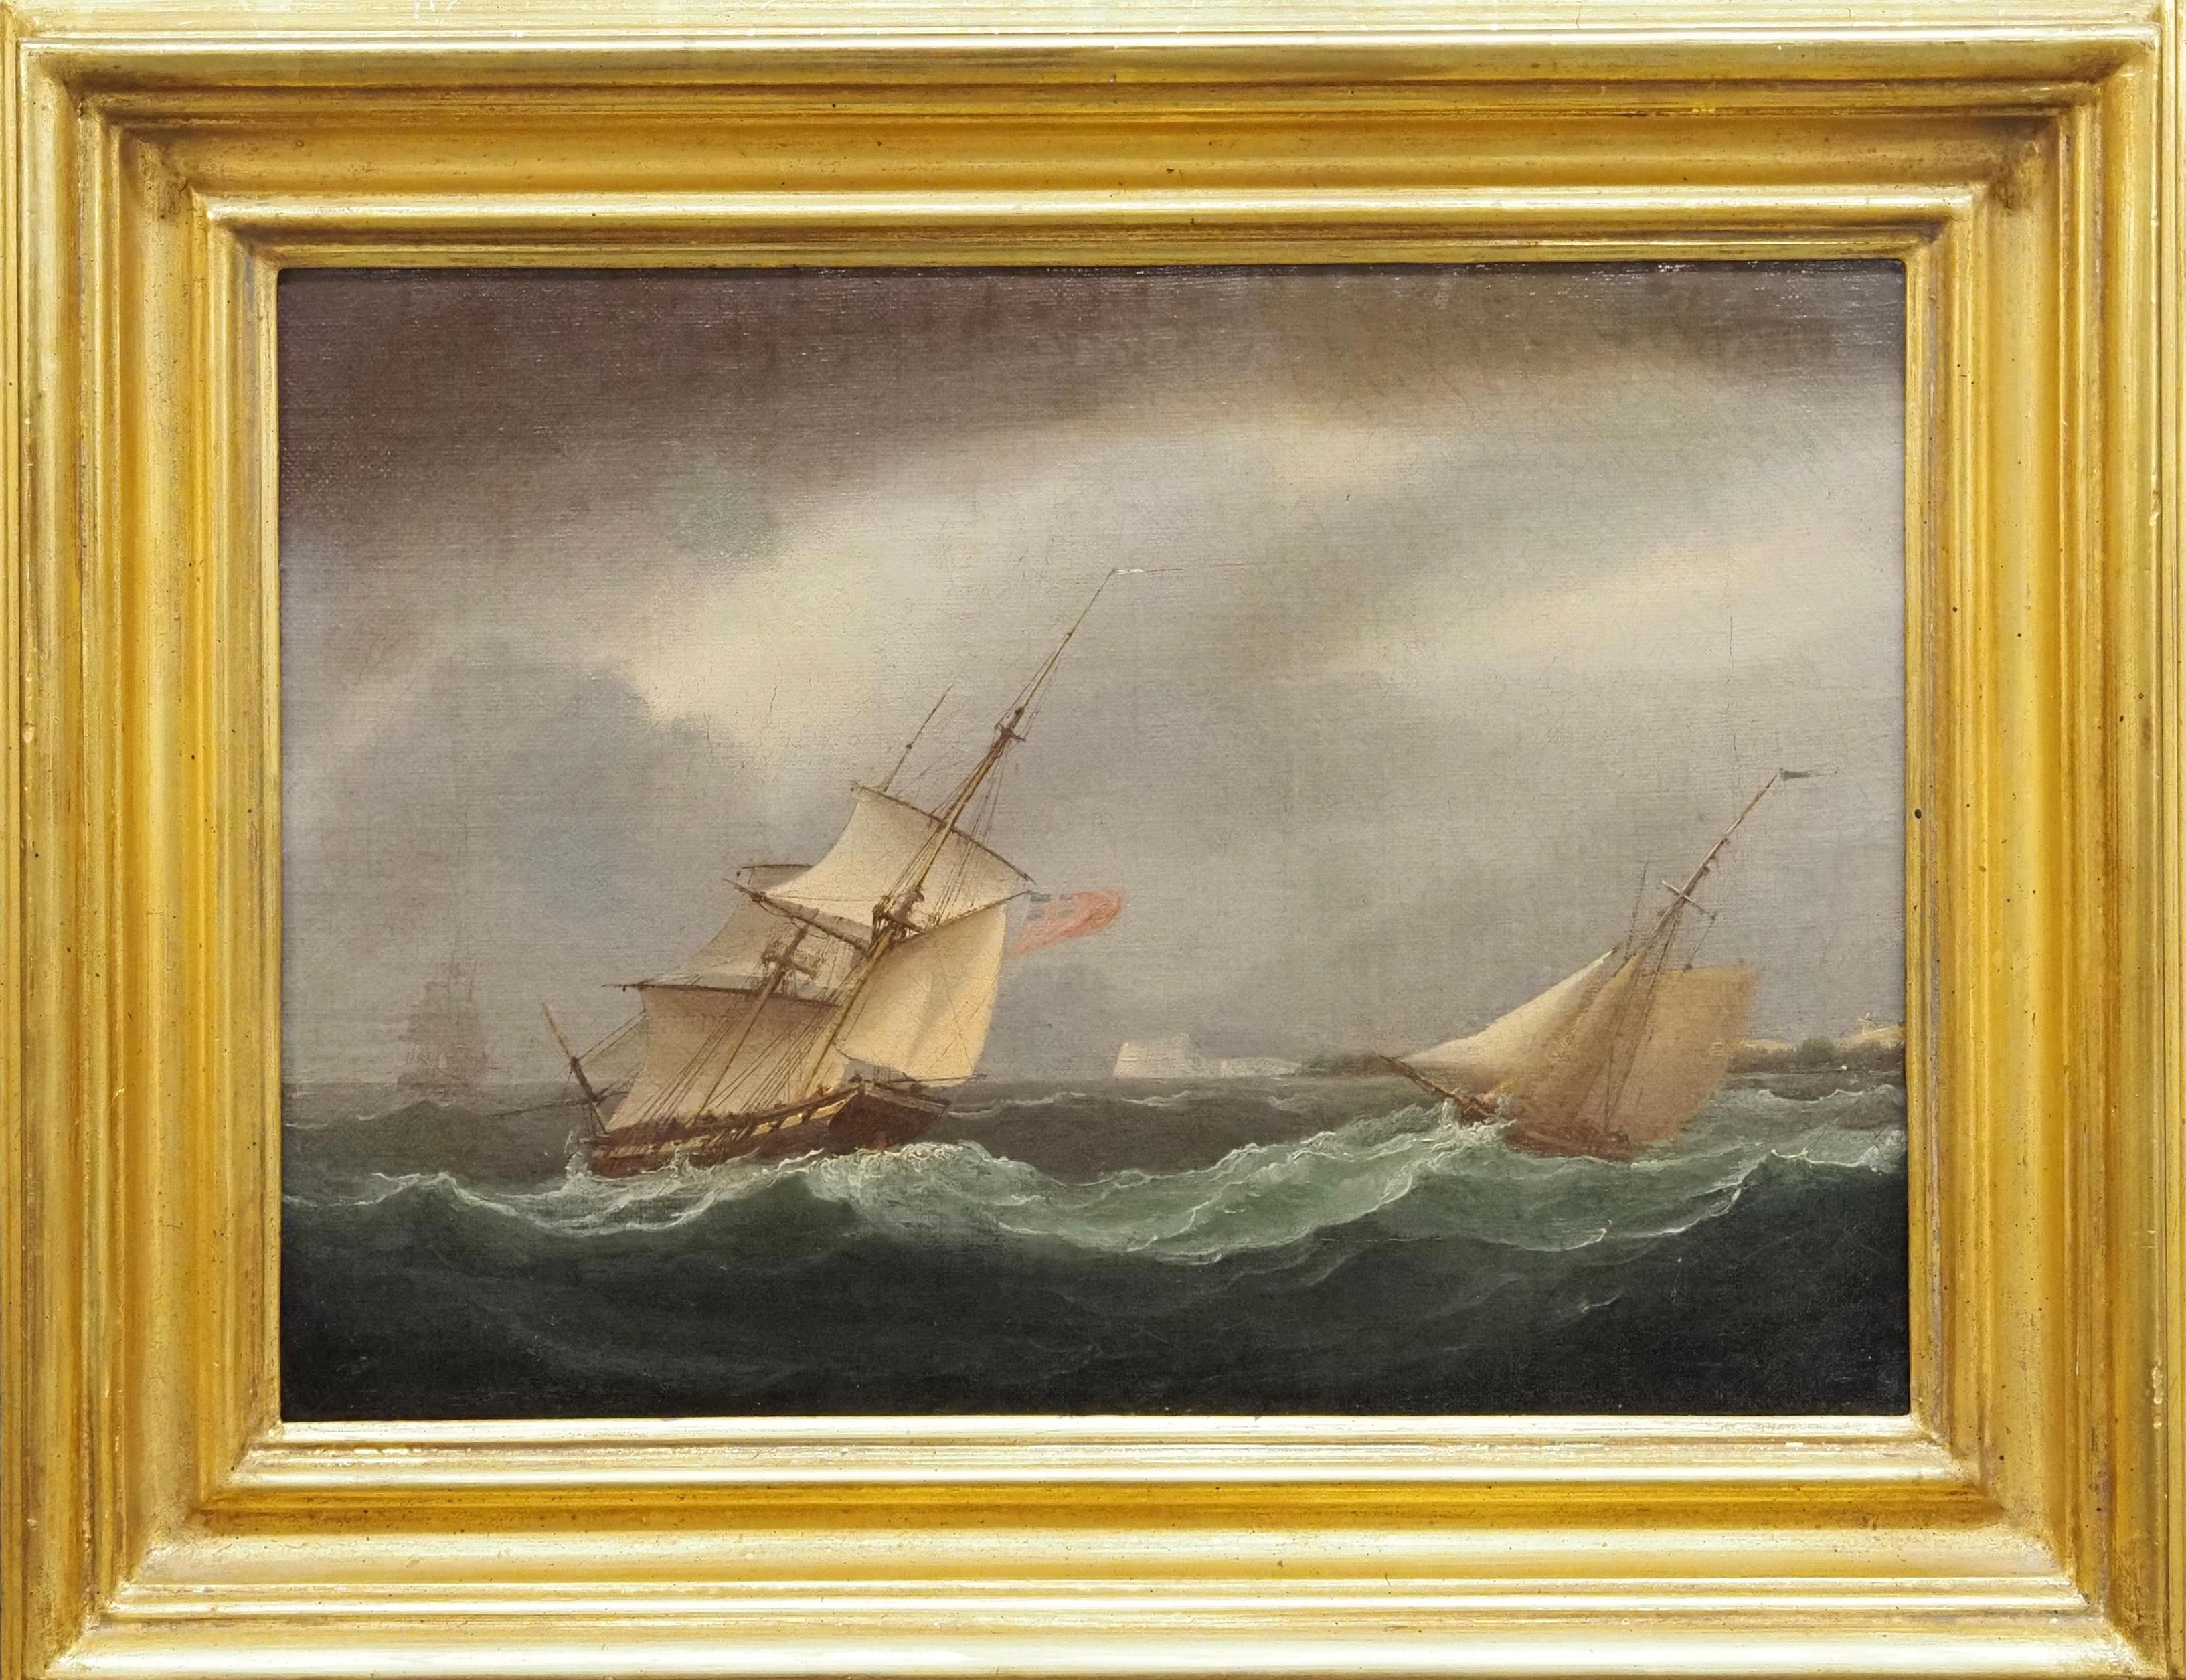 Thomas Buttersworth Landscape Painting - Shipping in choppy waters of a coastline